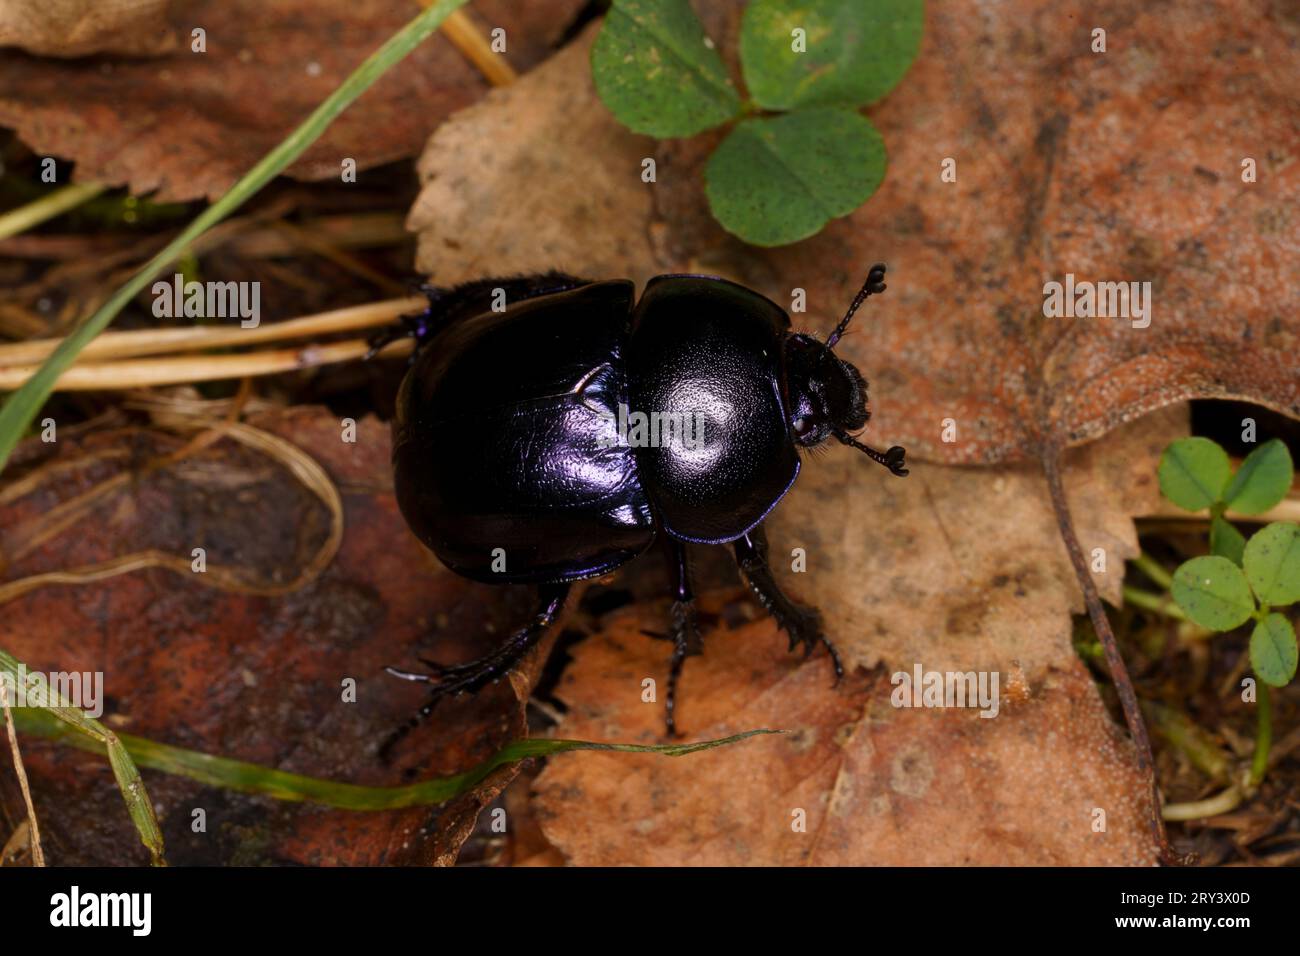 Trypocopris vernalis Family Geotrupidae Genus Trypocopris Spring dumbledor Spring dor beetle wild nature insect photography, picture, wallpaper Stock Photo